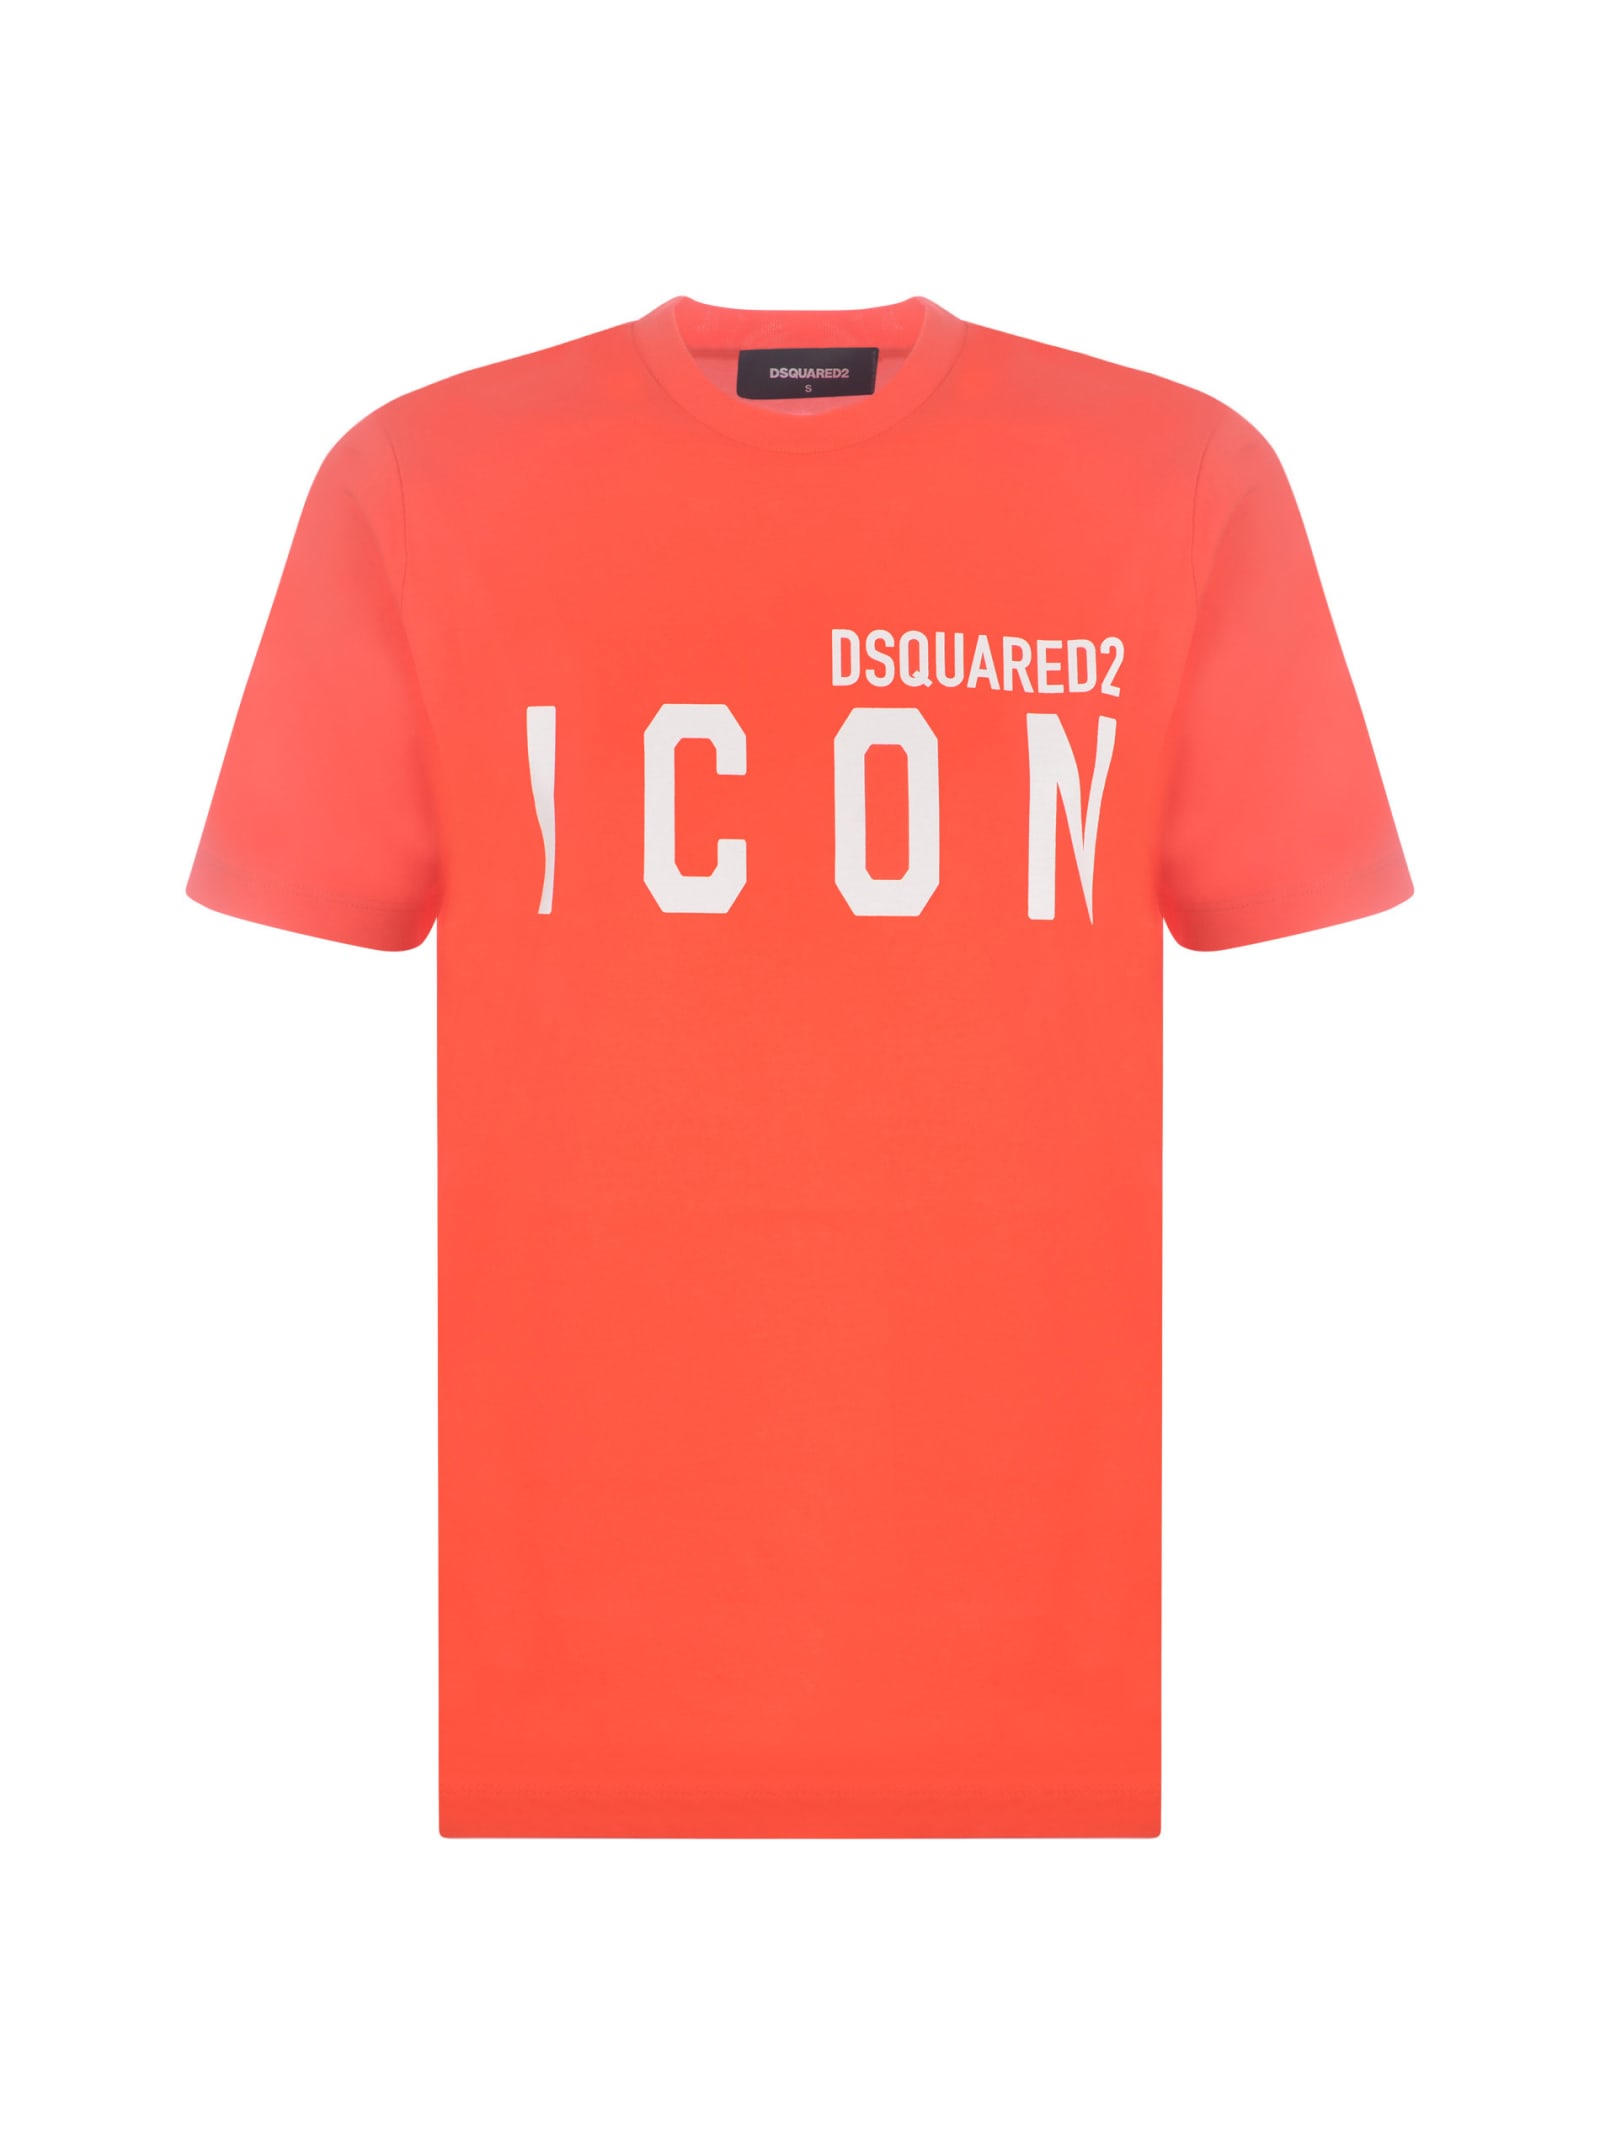 DSQUARED2 T-SHIRT DSQUARED2 ICON IN COTTON JERSEY